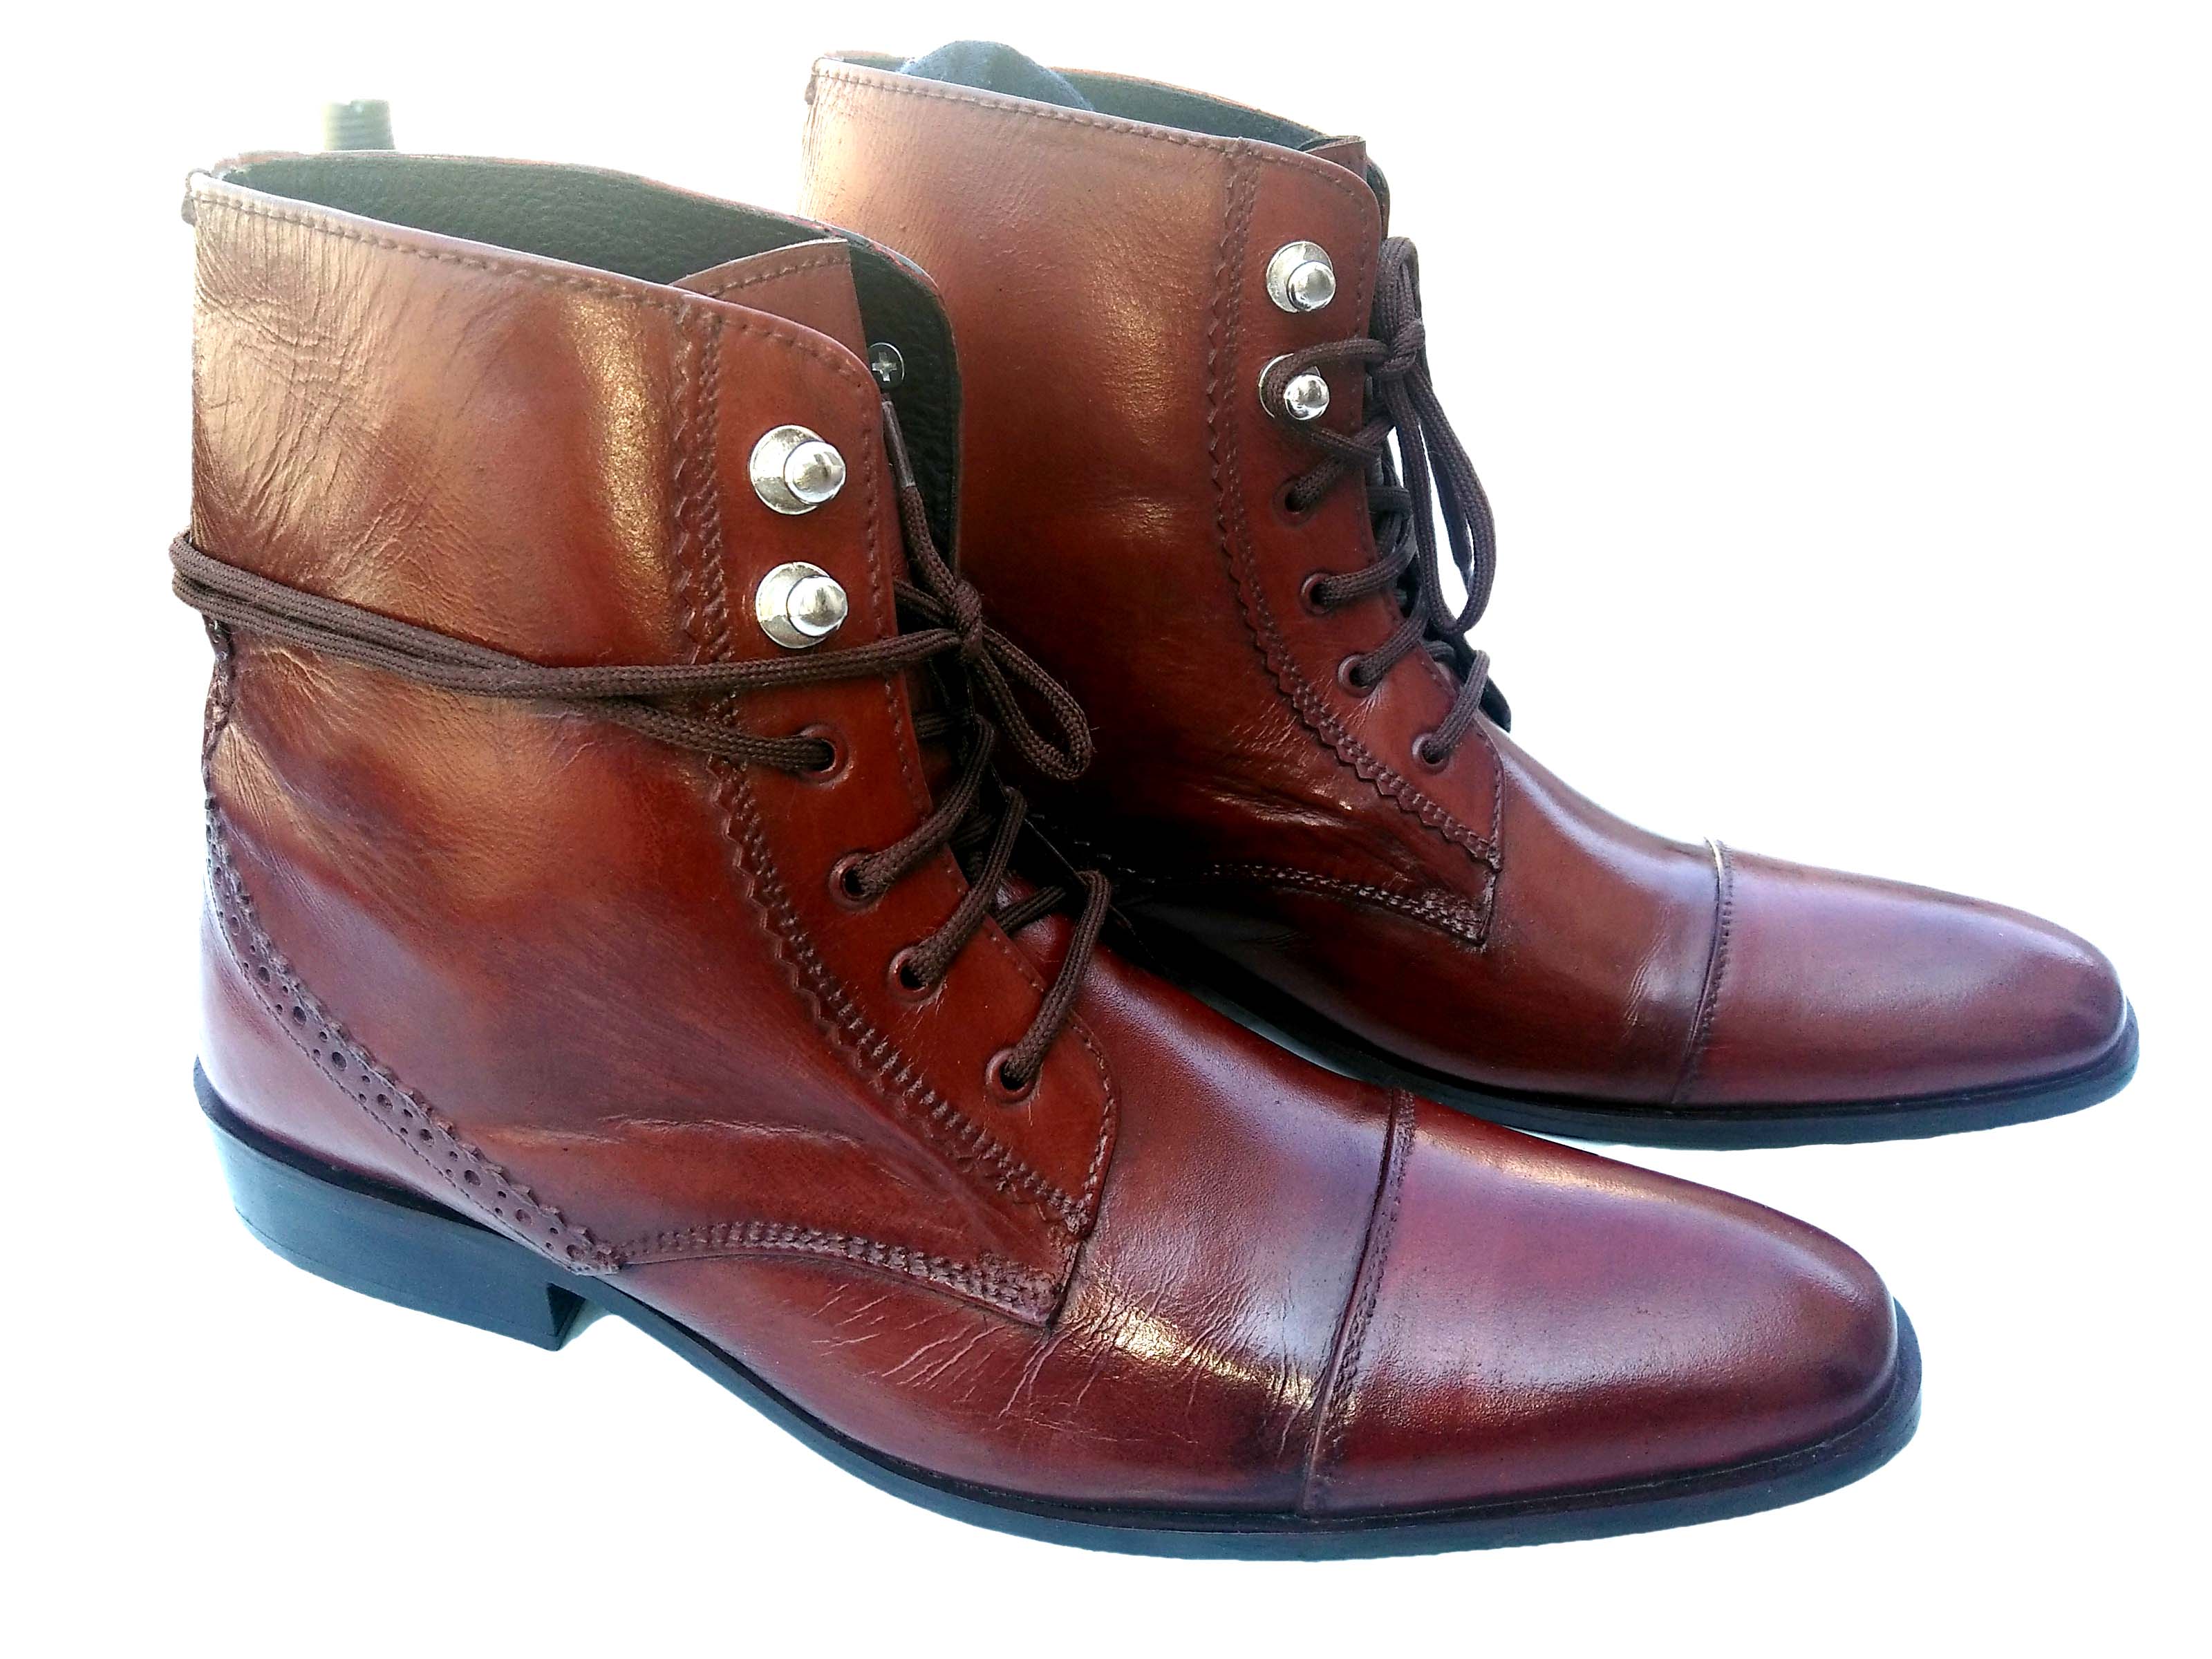 Brown leather lace up boots